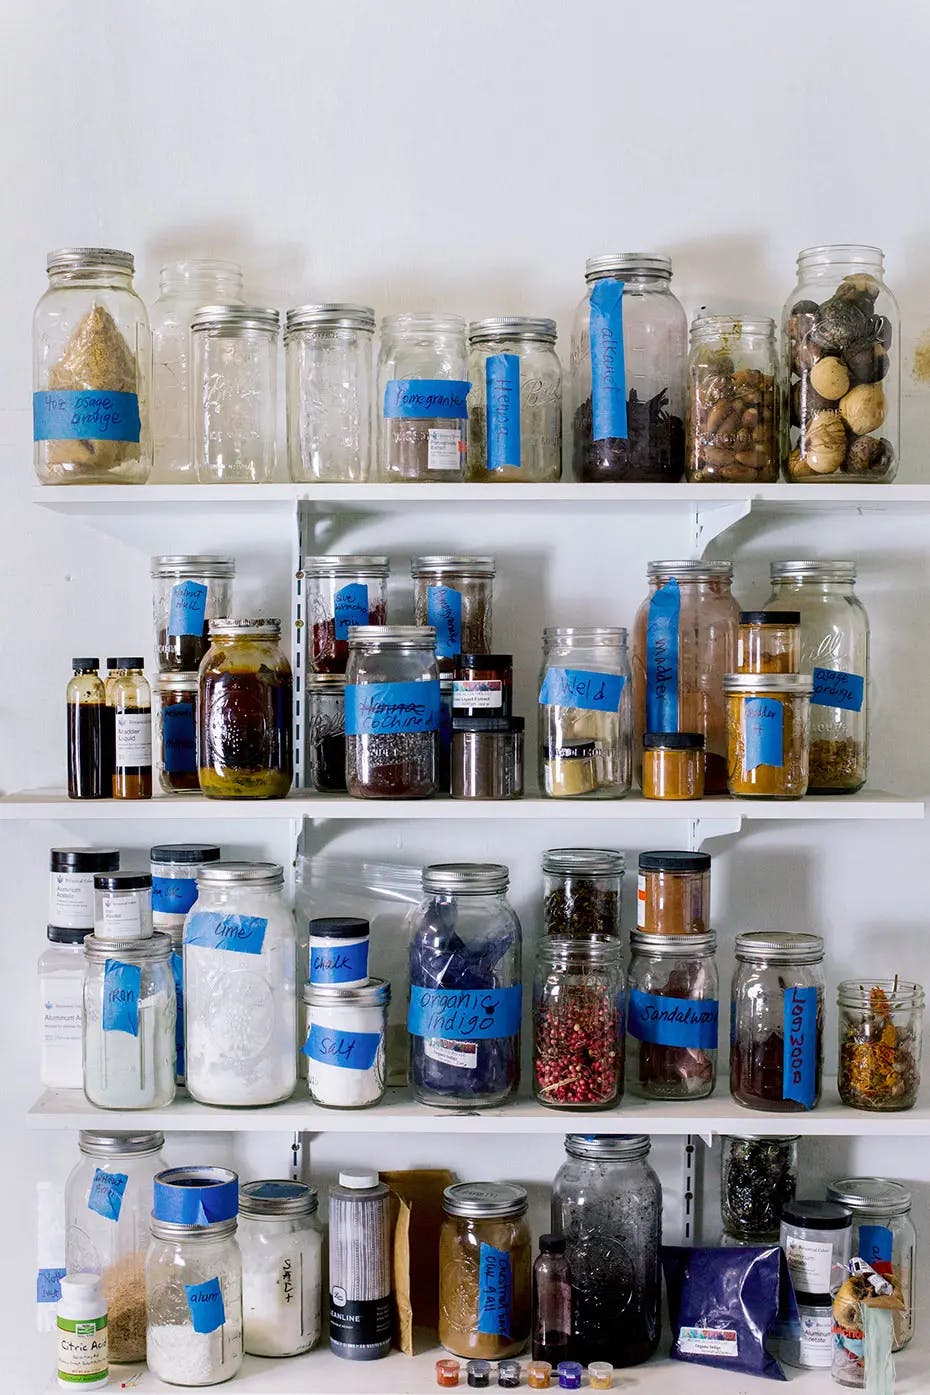 Shelves with glass jars containing organic materials for pigmentation in artist Carrie Crawford's studio.